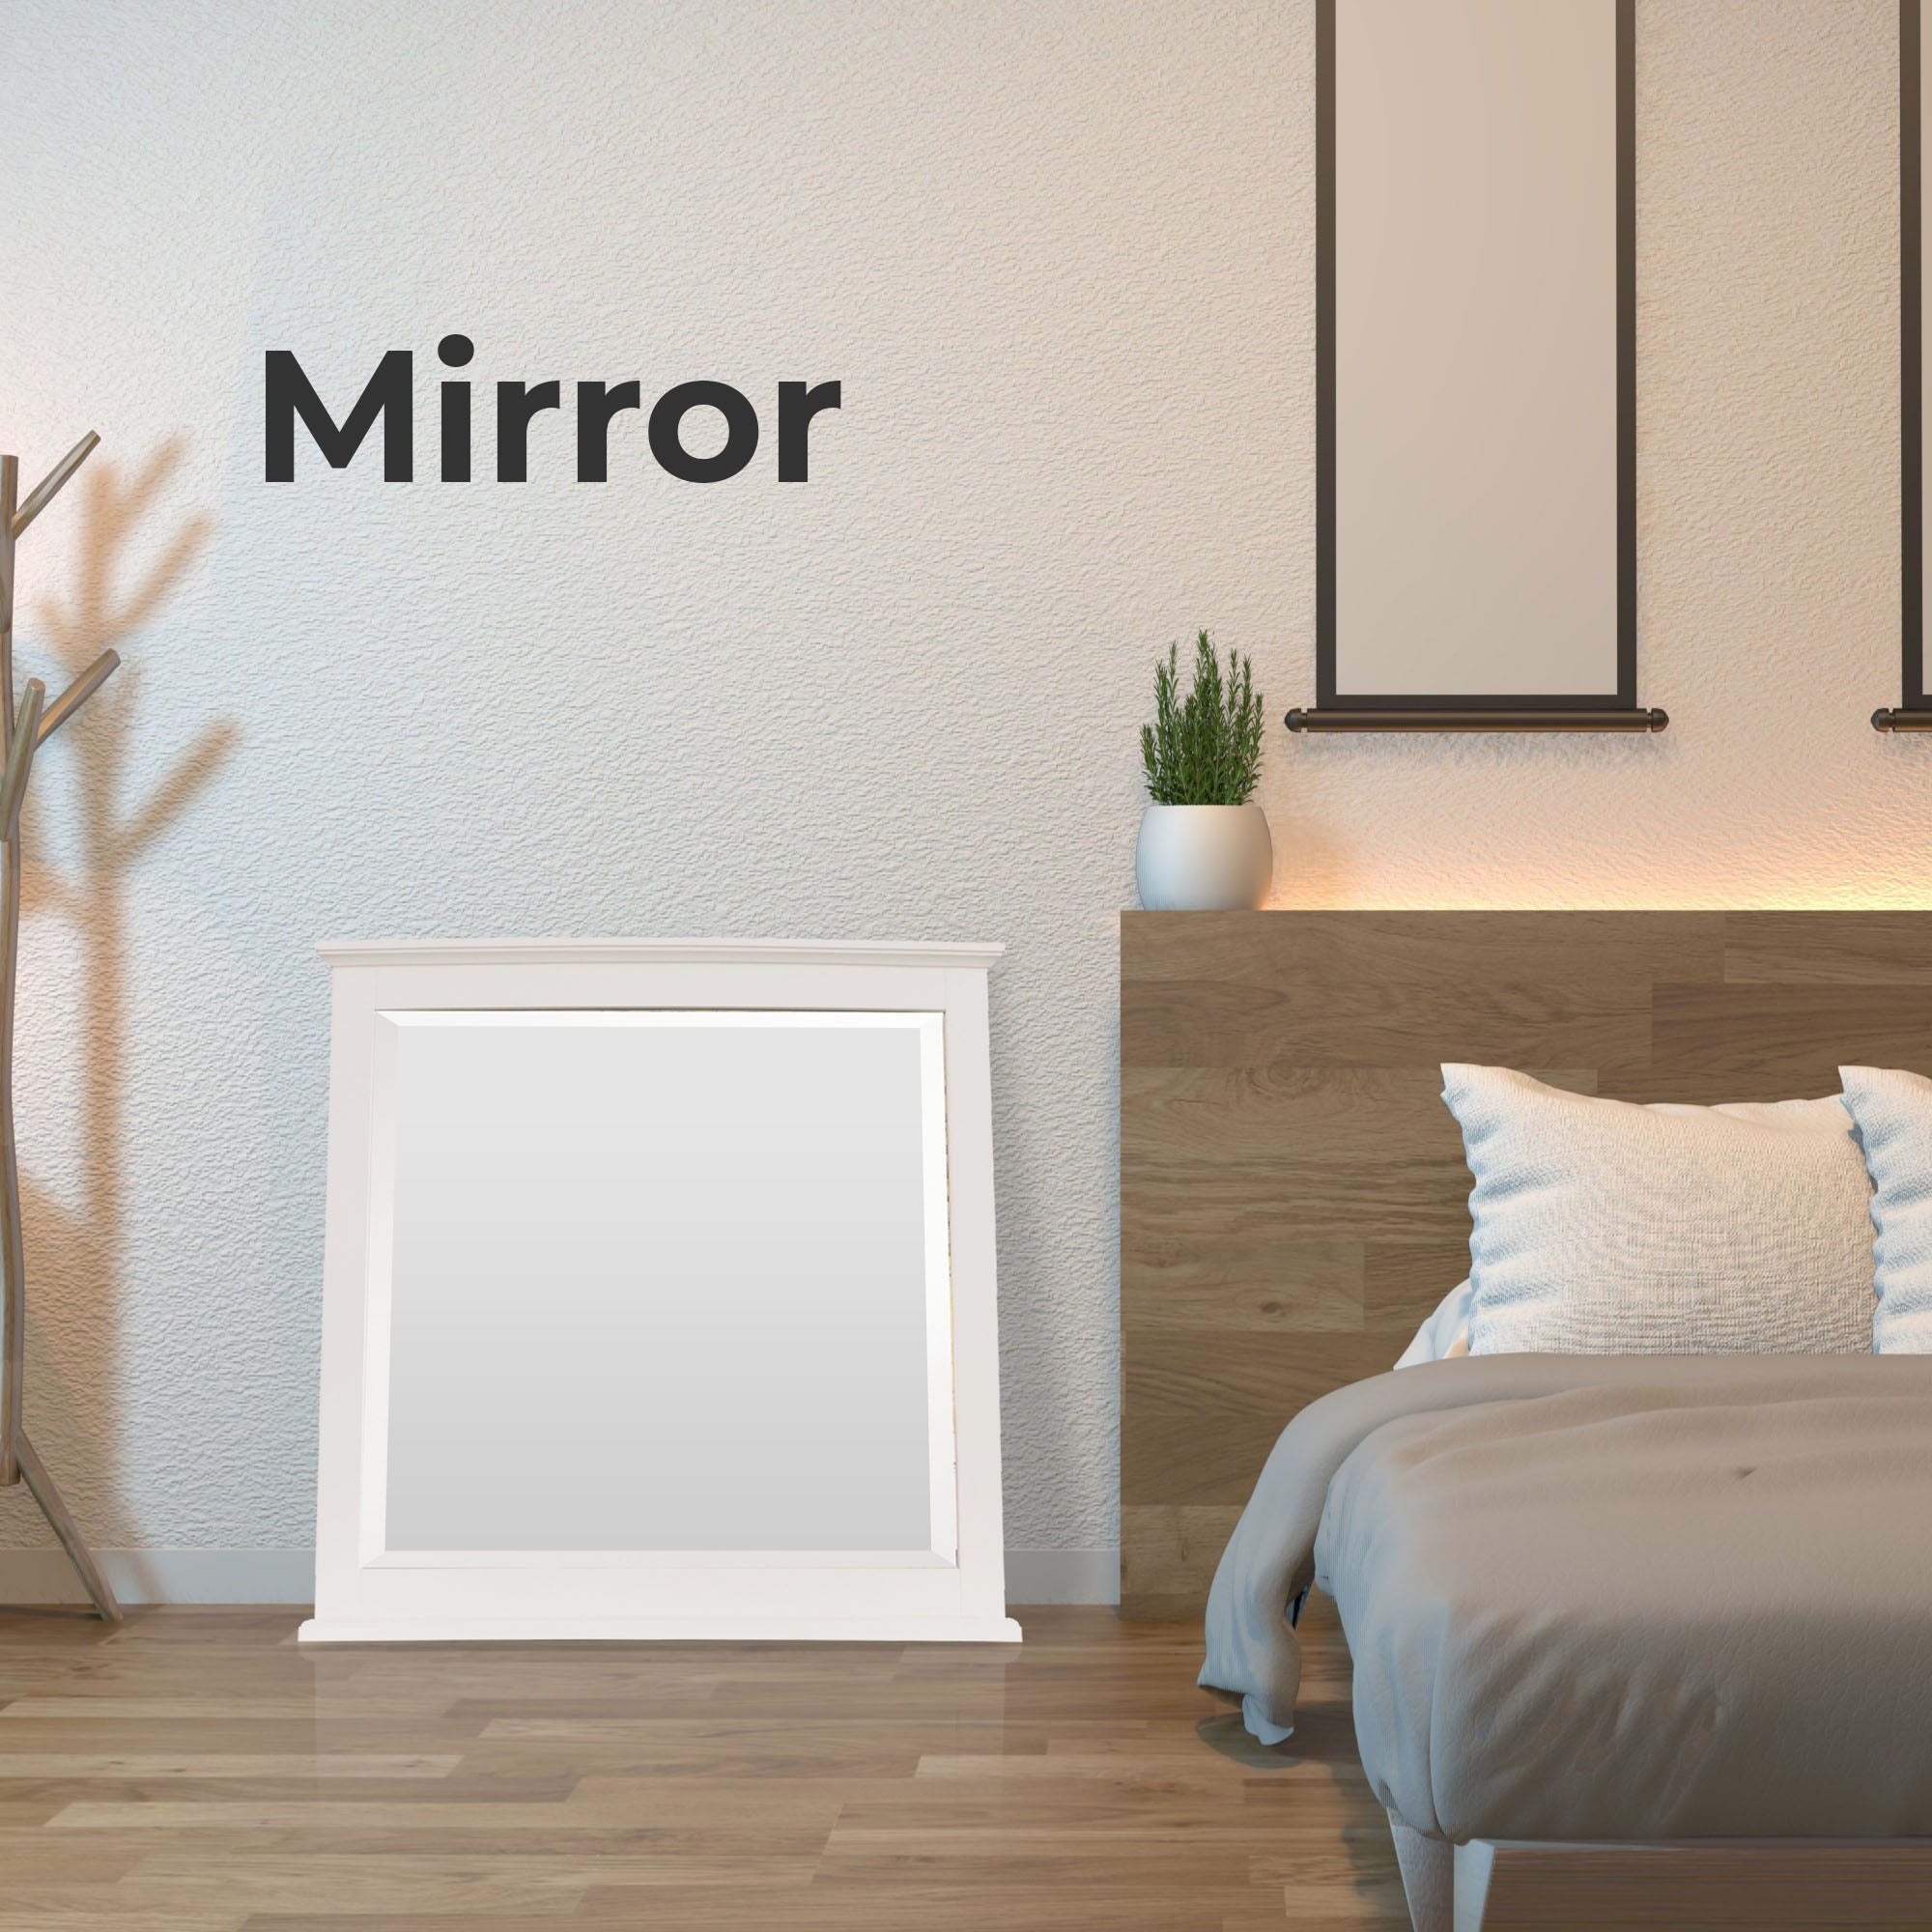 Back In Stock! Dresser Mirror With Wood Timber Frame - White